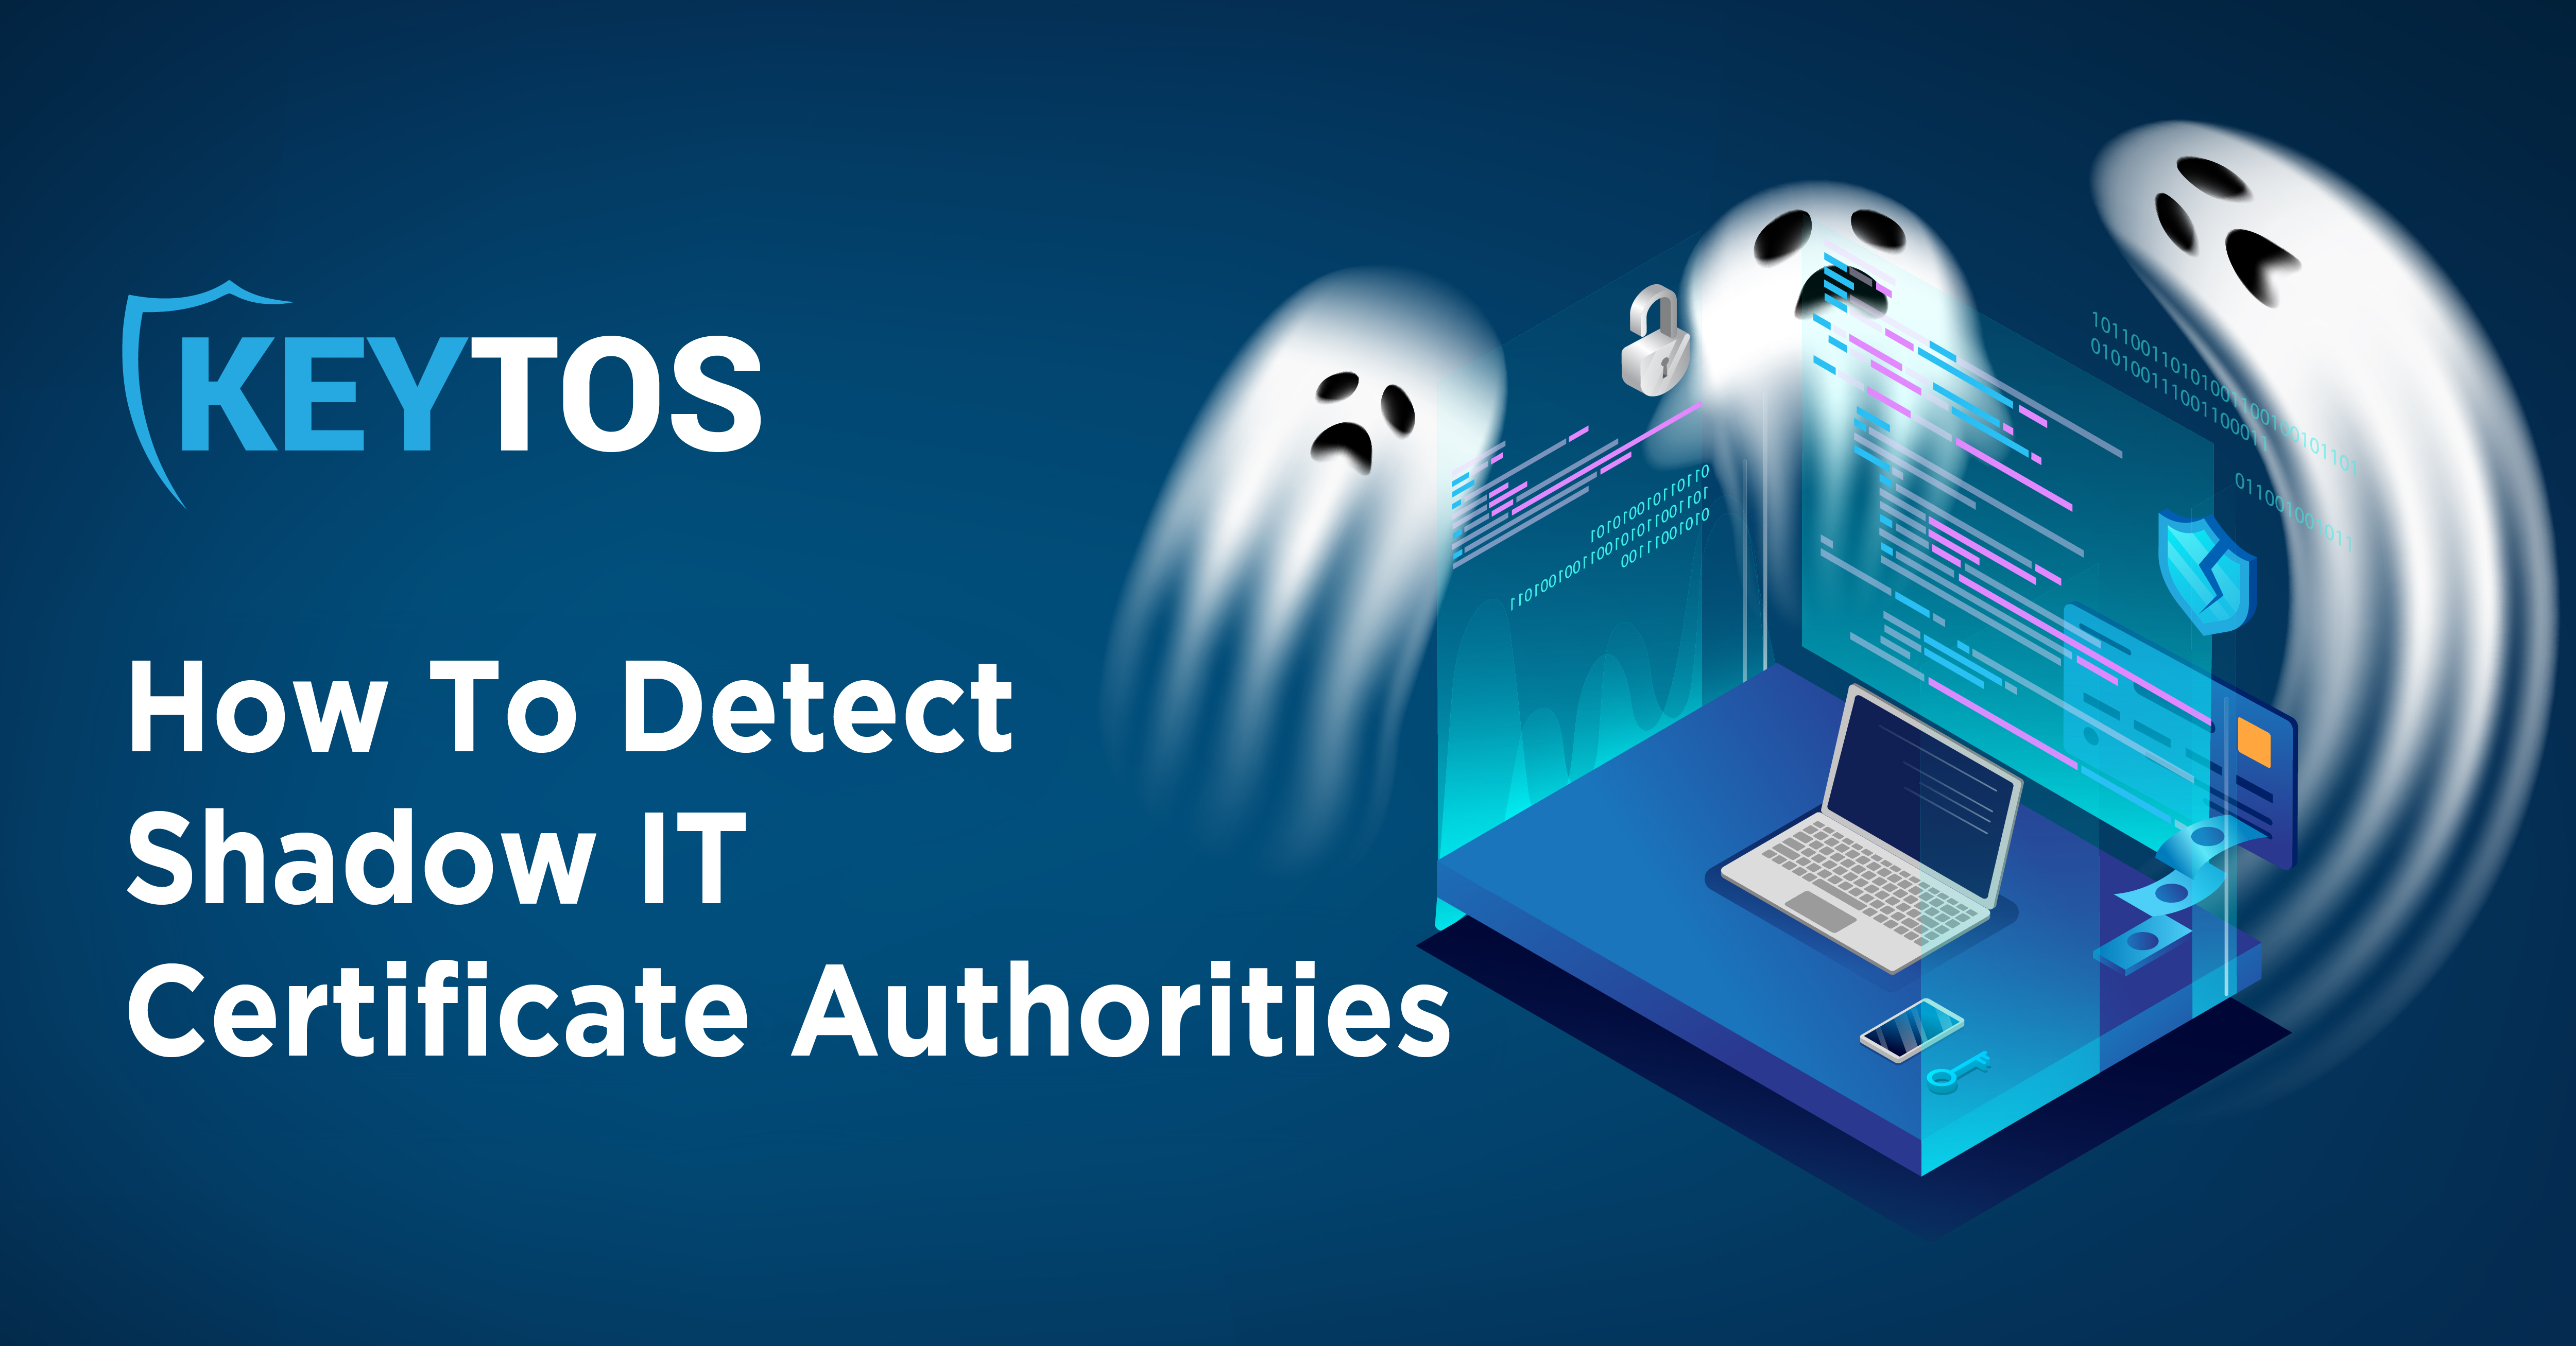 How to Detect Shadow IT Certificate Authorities